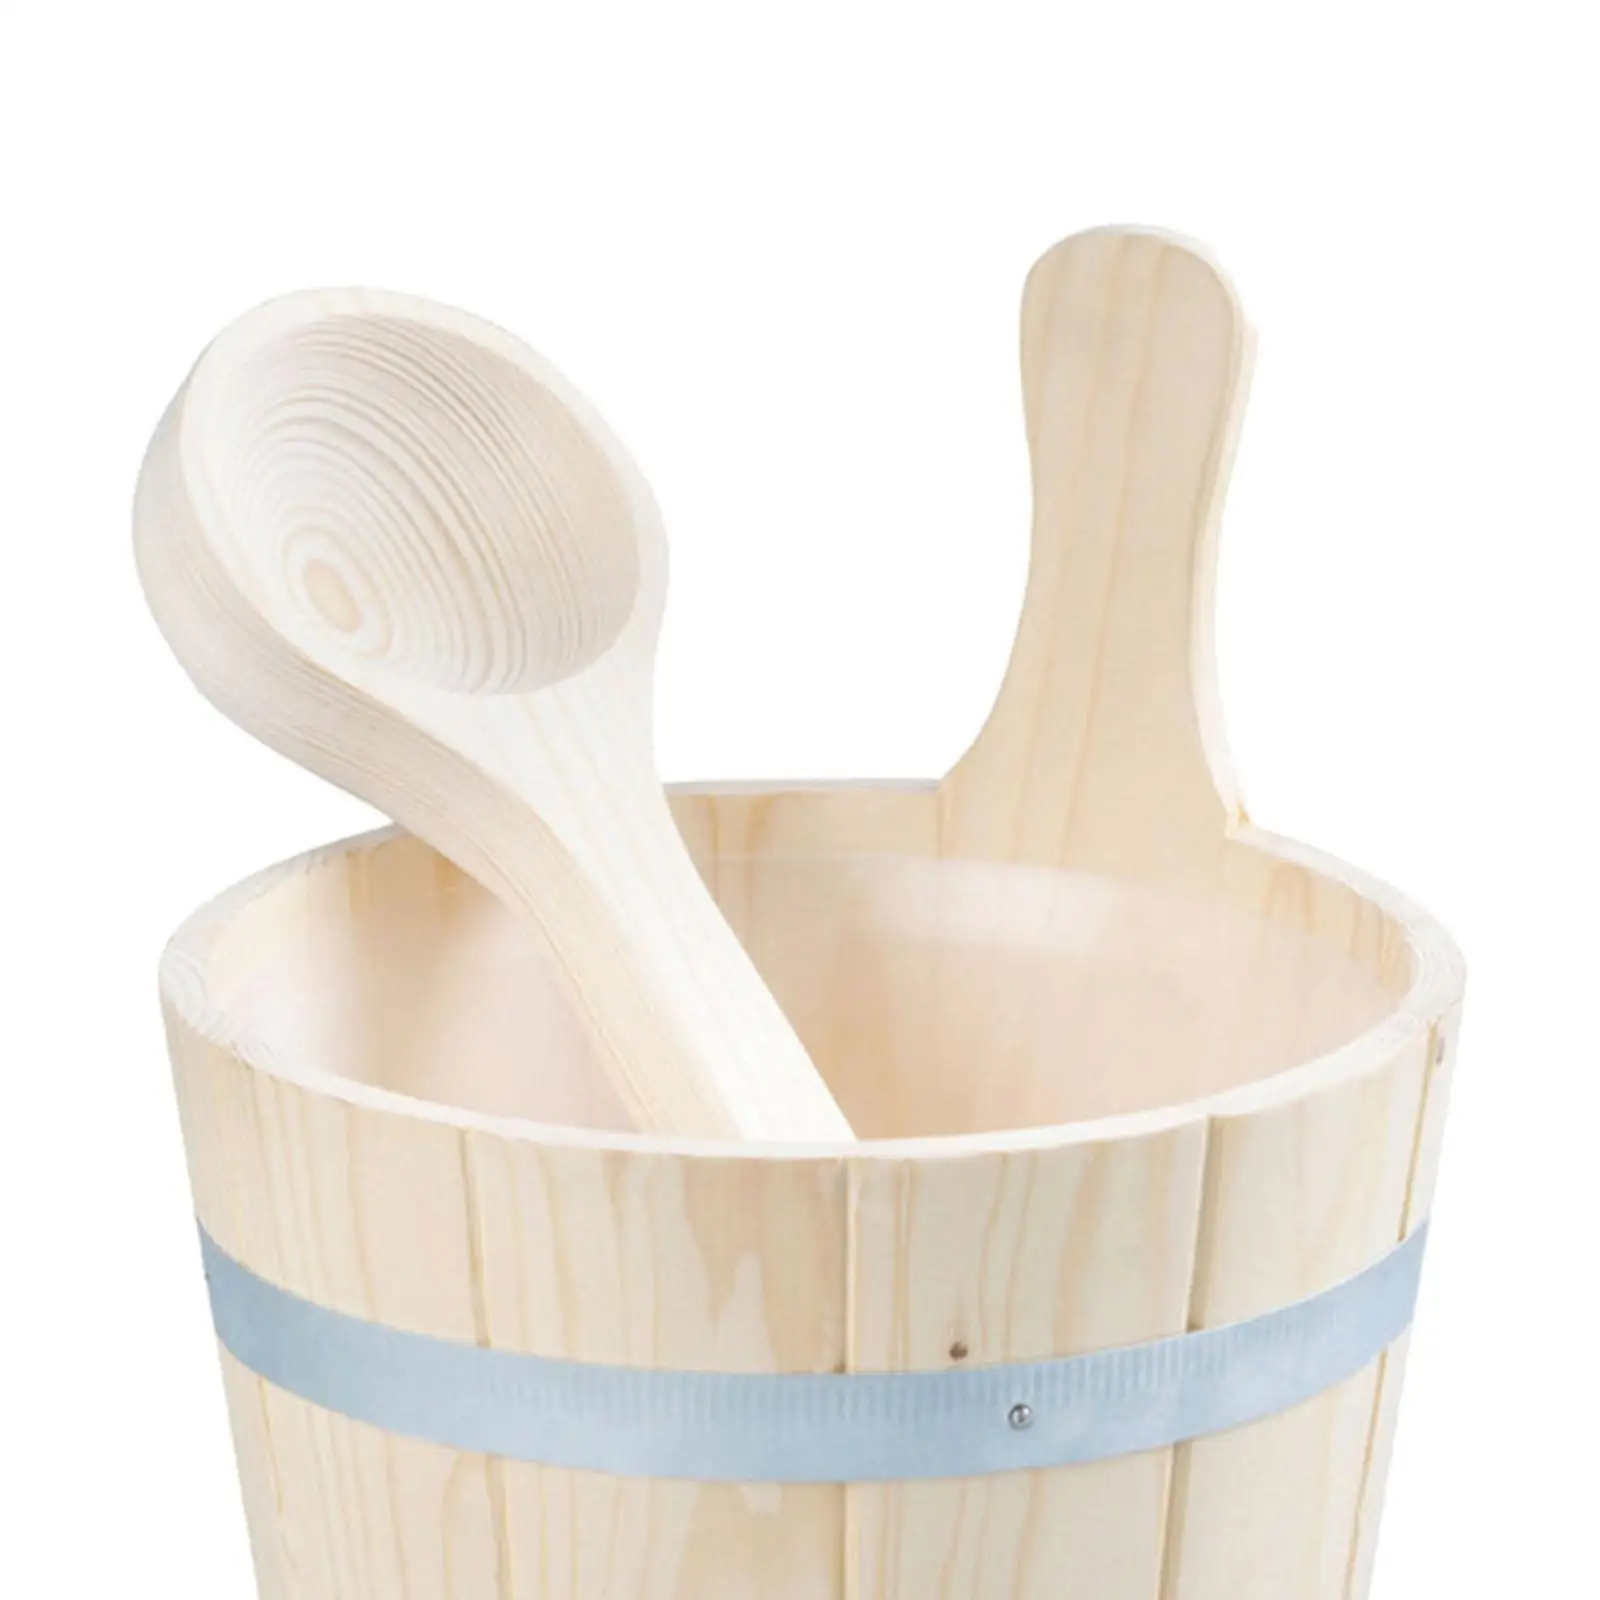 Wooden Sauna Bucket and Ladle Set Portable with Sauna Liner 5L for SPA Room